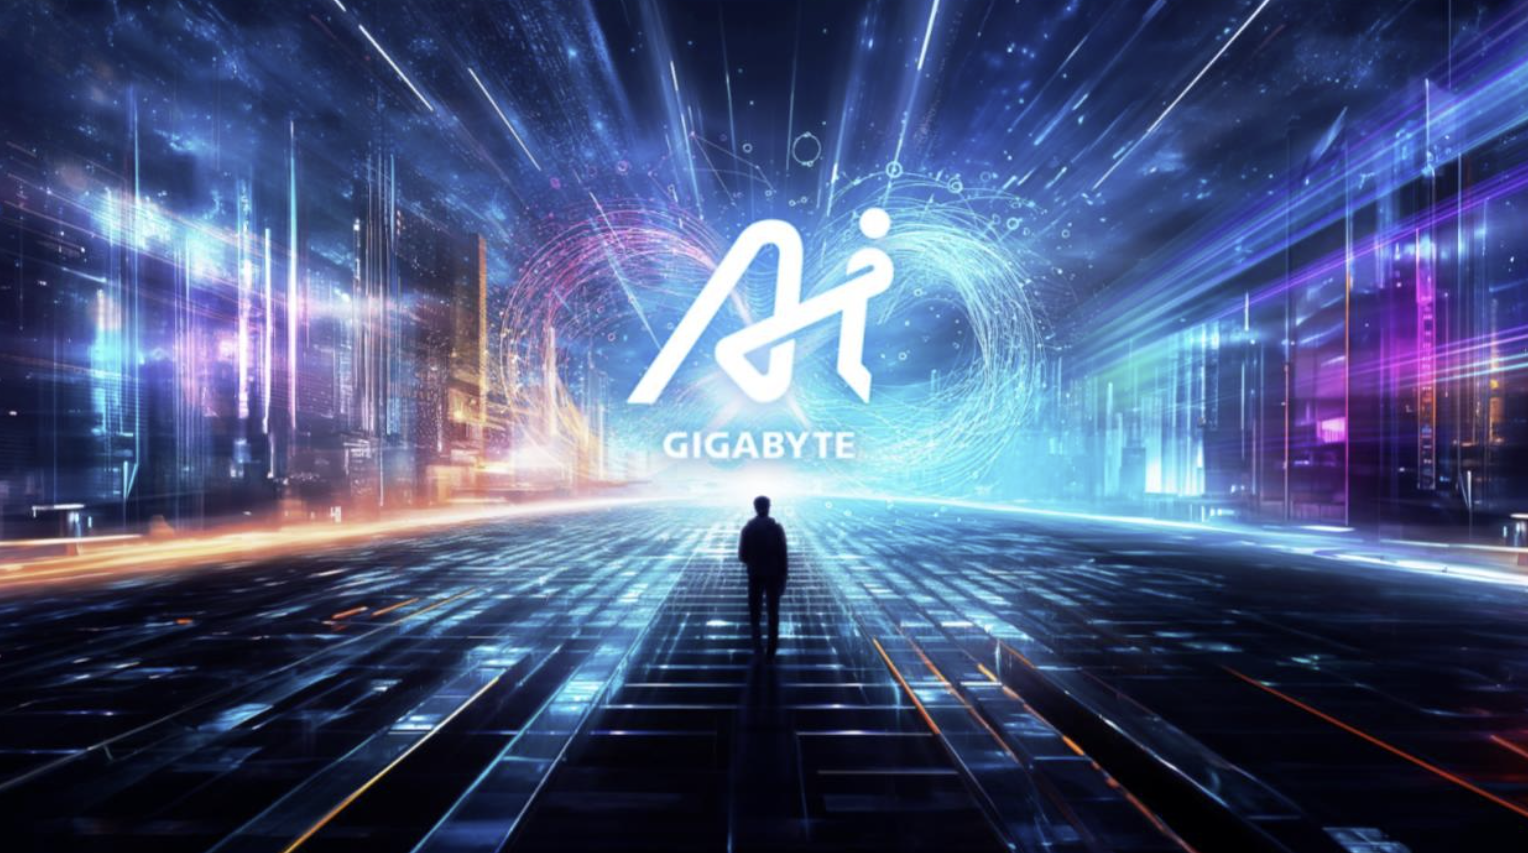 GIGABYTE Pioneers AI PC Market with AI Innovations and Leading Silicon Partnerships